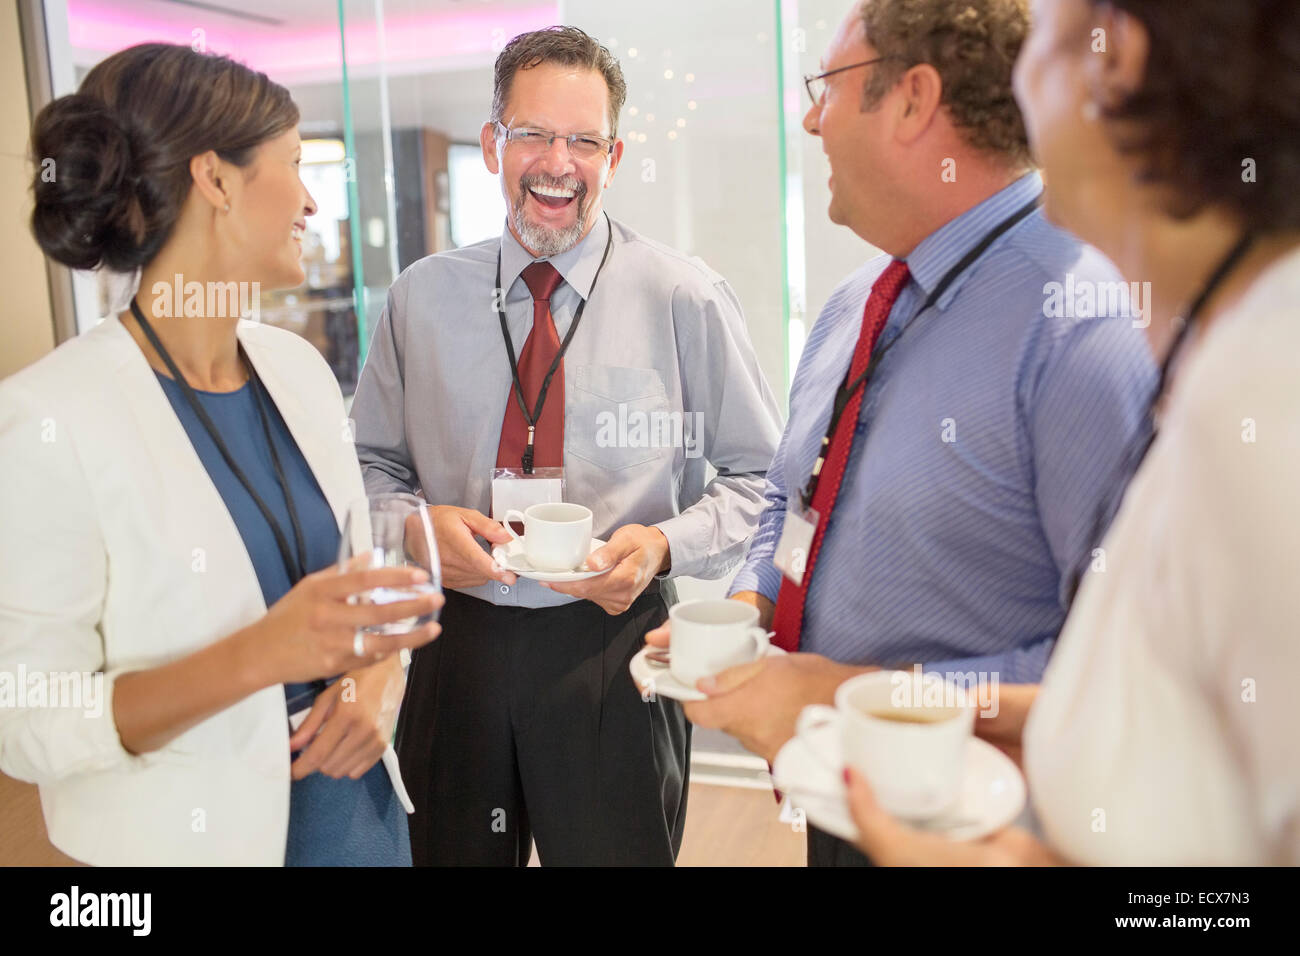 People in lobby of conference center during coffee break Stock Photo